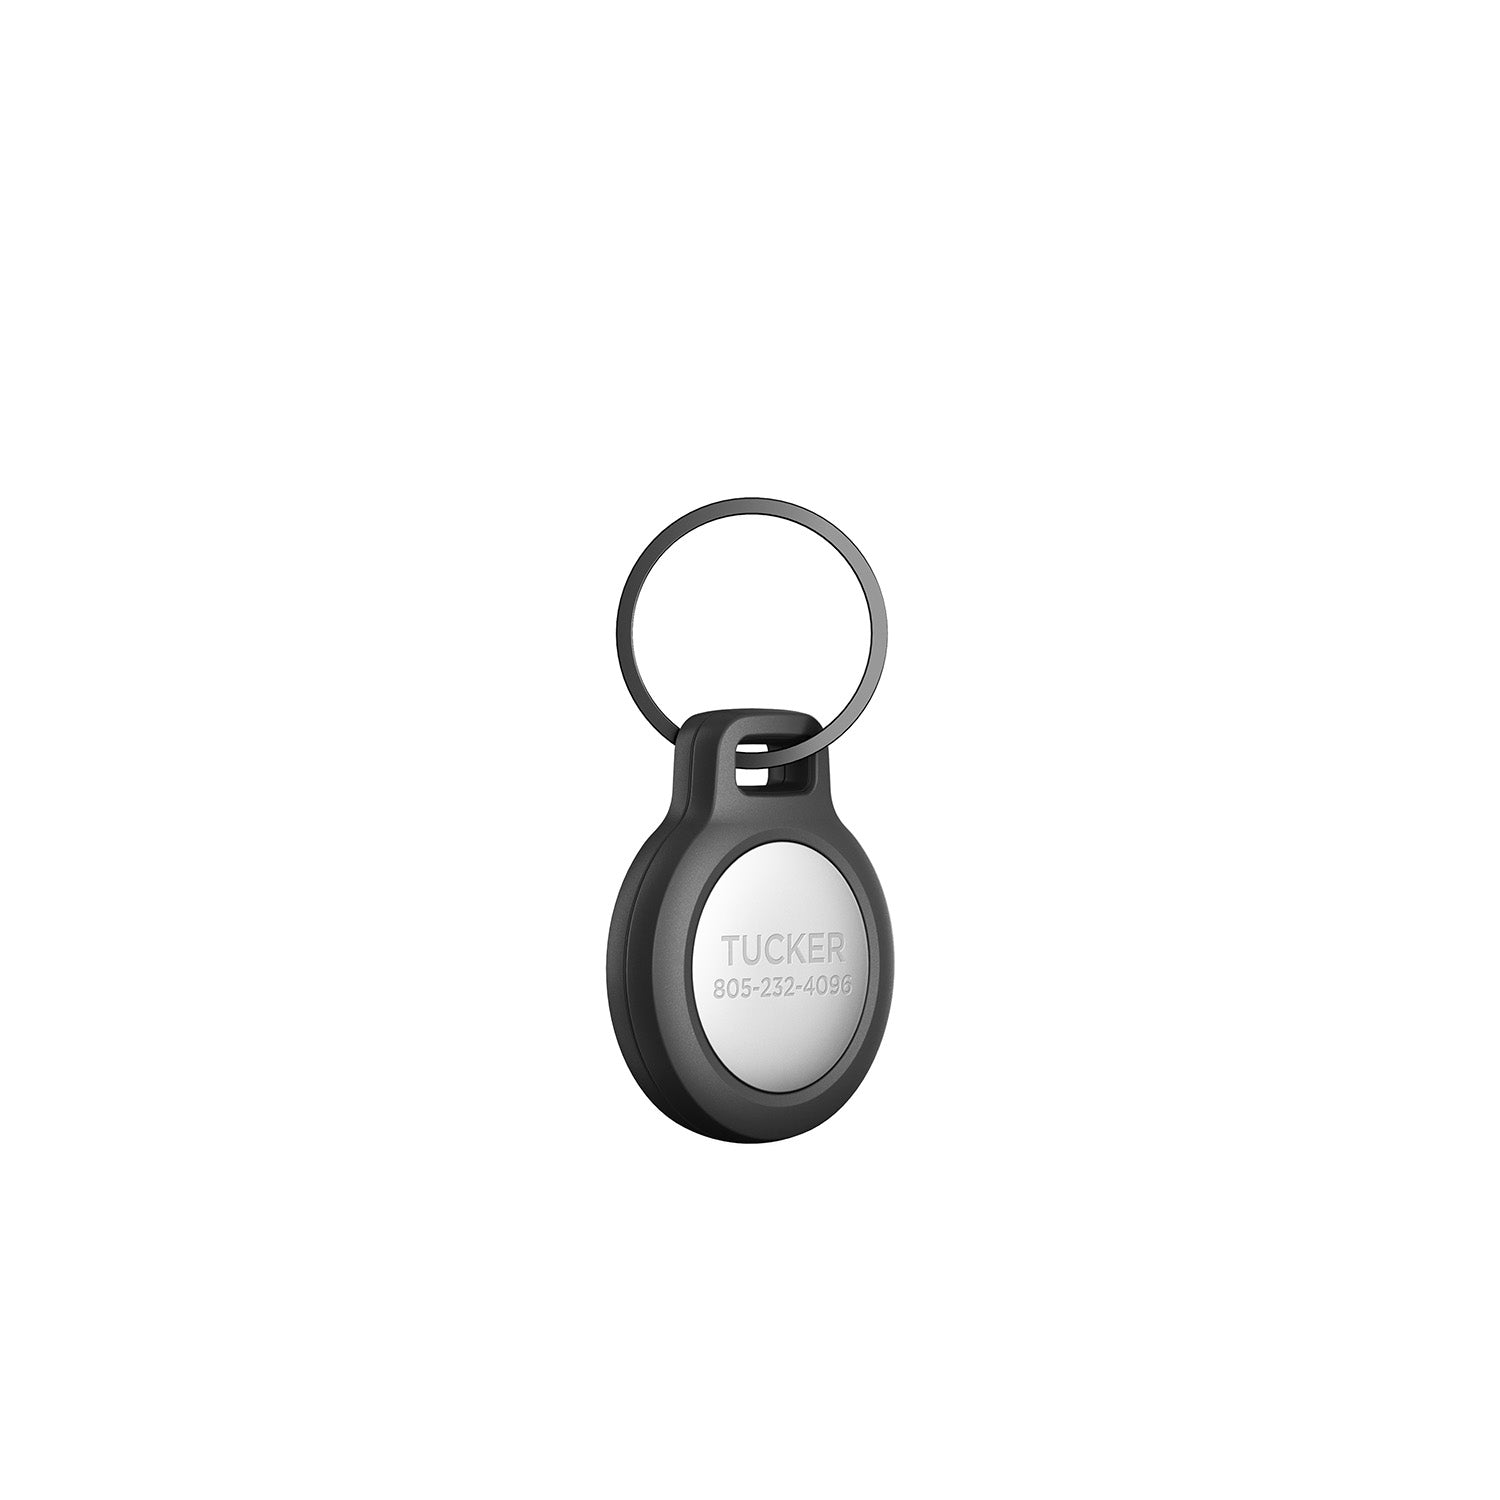 NOMAD Rugged Keychain for AirTag Default NOMAD 